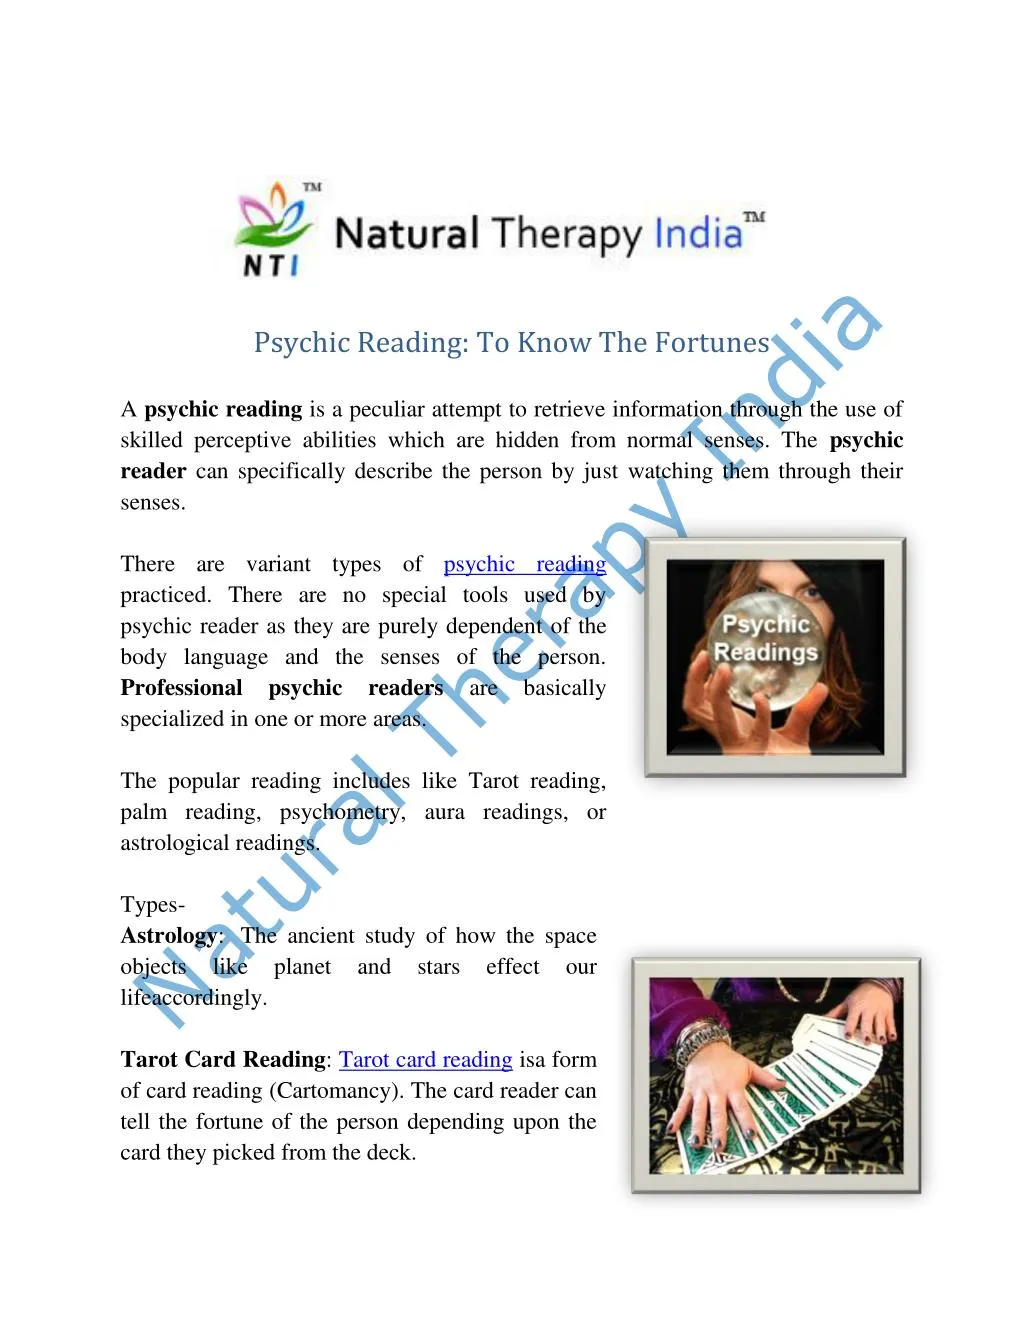 PPT - Psychic Reading in India - Best Psychic Reader ...